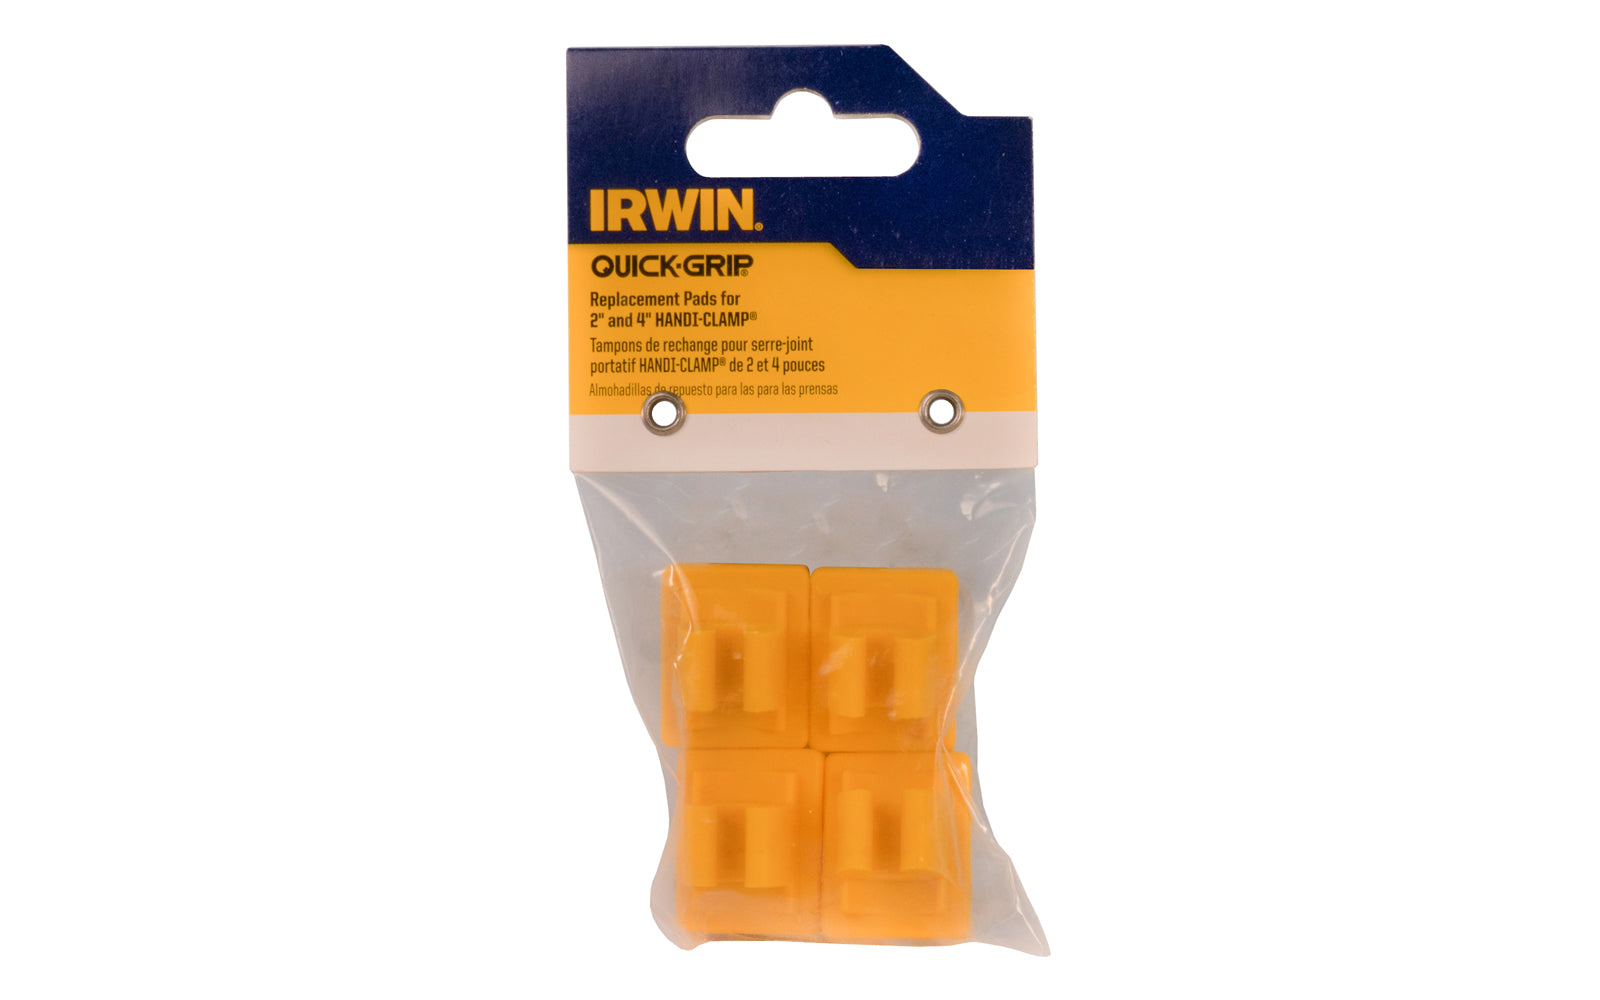 Irwin Replacement Pads for 2